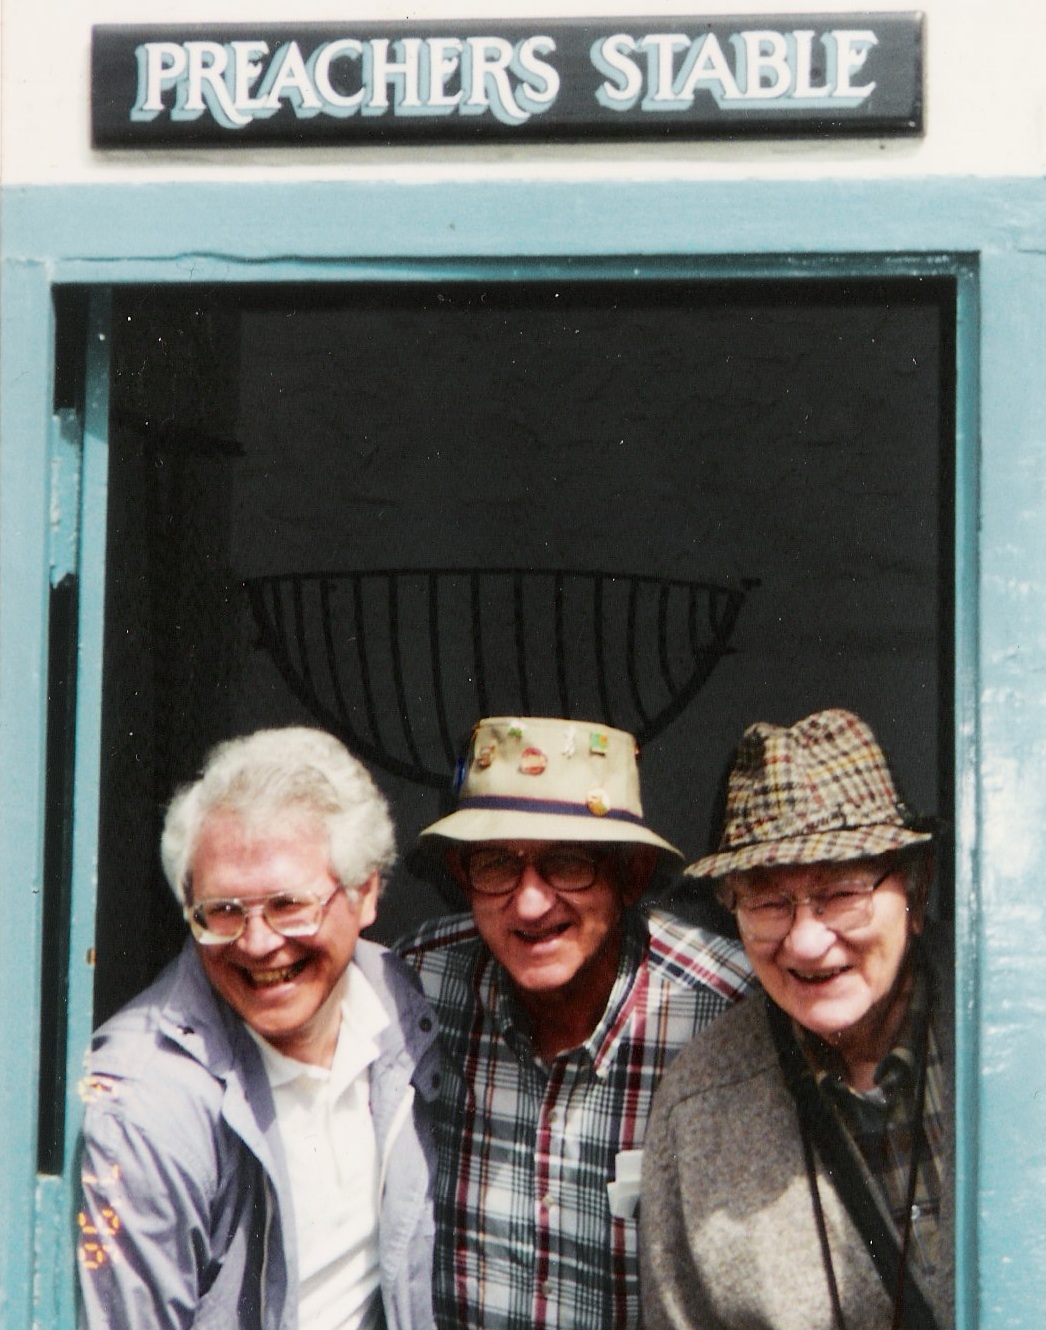 Brethren in Christ educators Luke L. Keefer Jr., Al Long, and Arthur Climenhaga pose for a lighthearted picture while on a tour of England in 1993. (Brethren in Christ Historical Library and Archives)